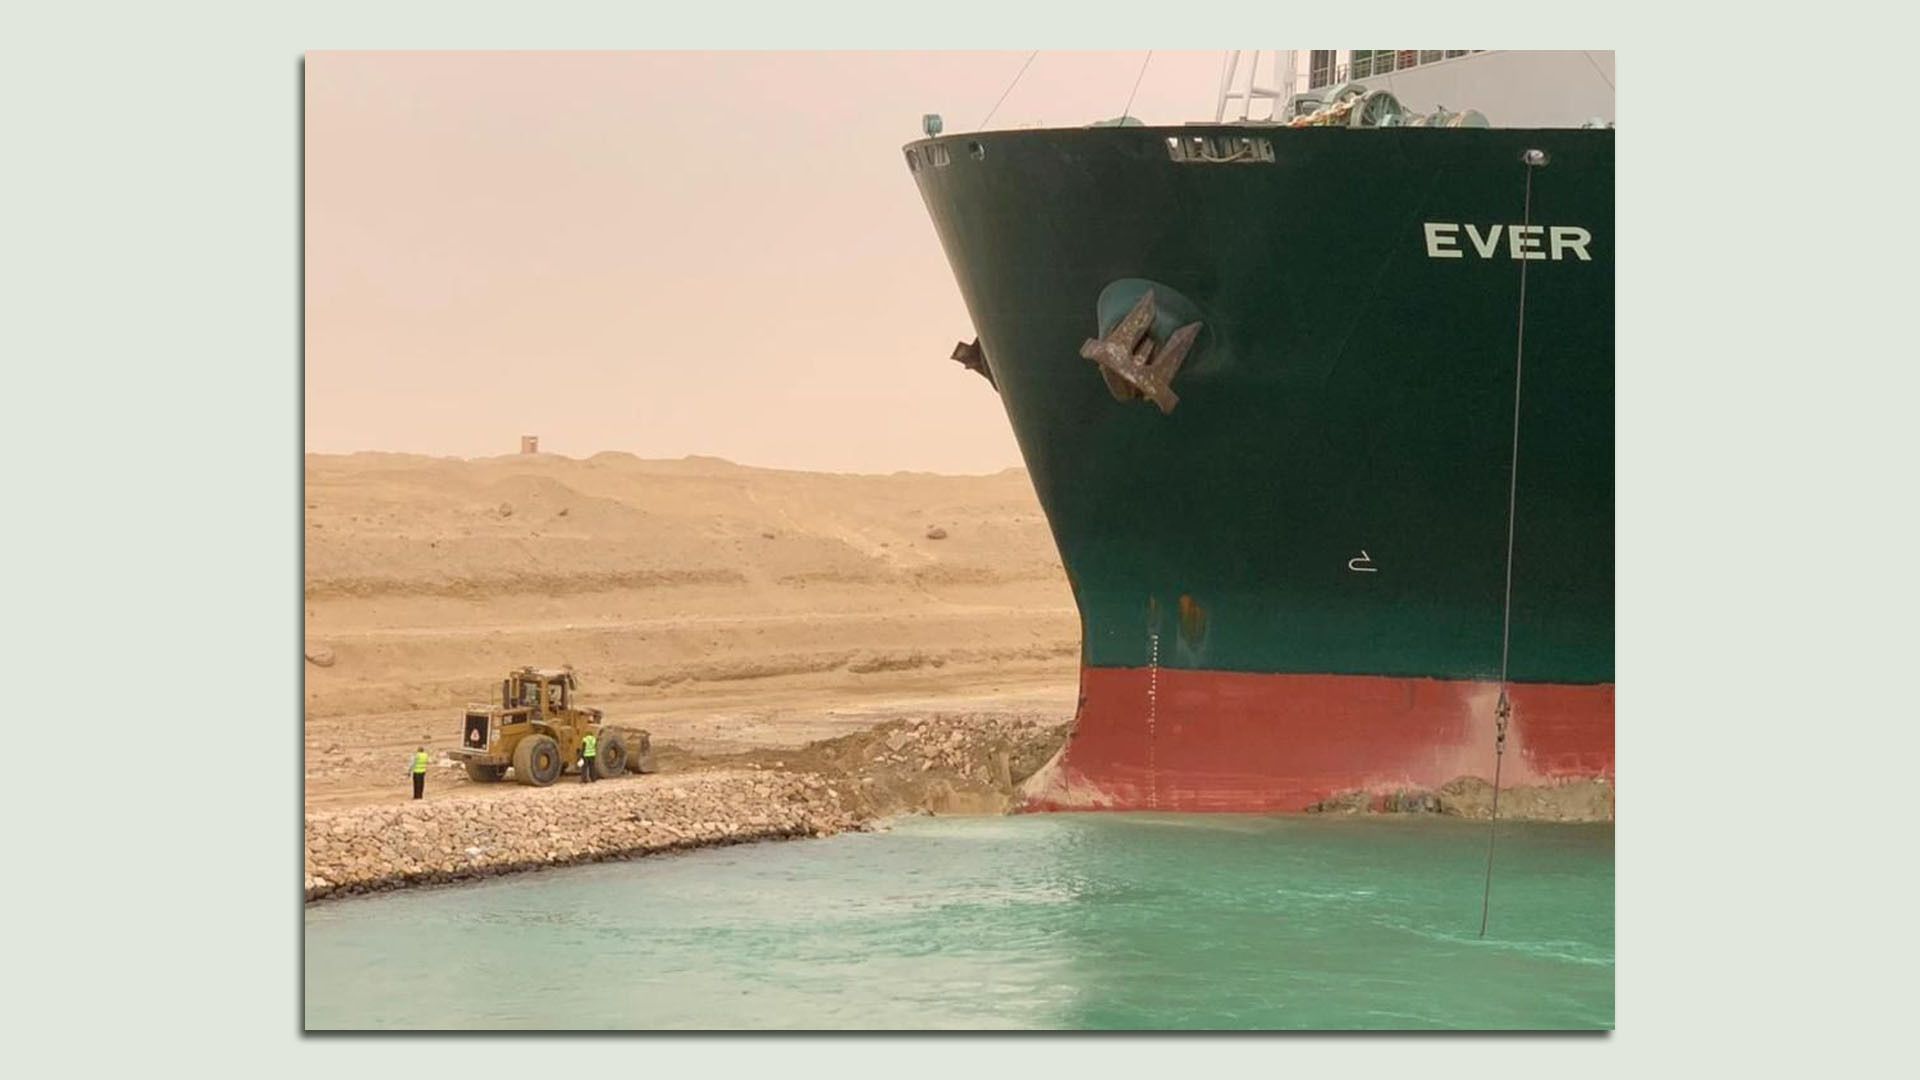 Photo of ship caught in Suez Canal